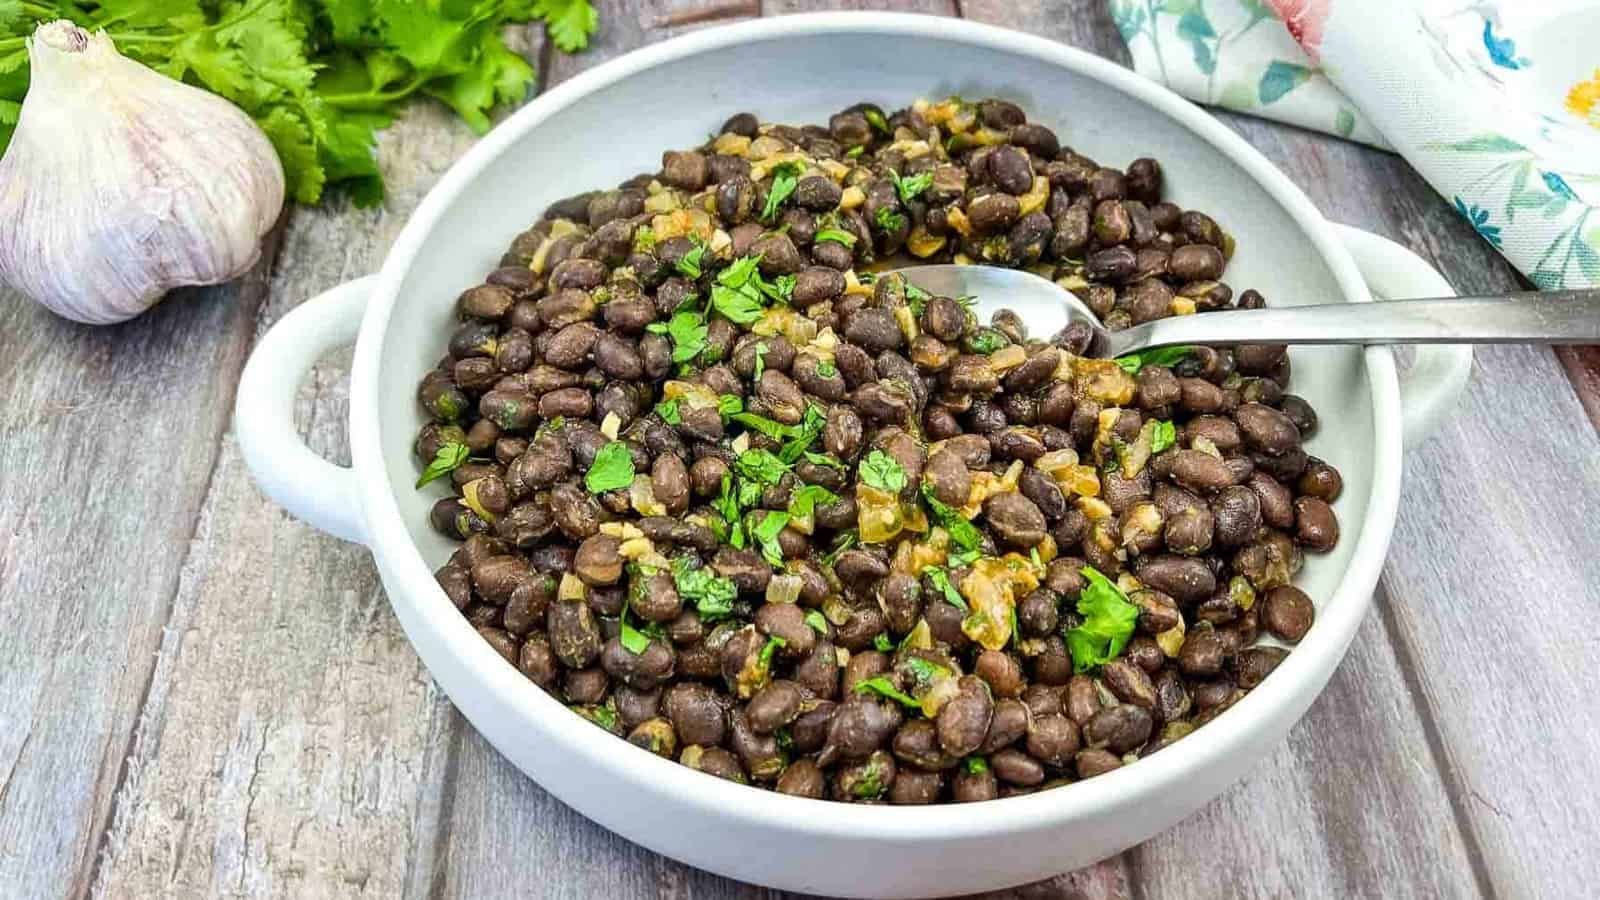 Mexican black beans in a white bowl with parsley and garlic.